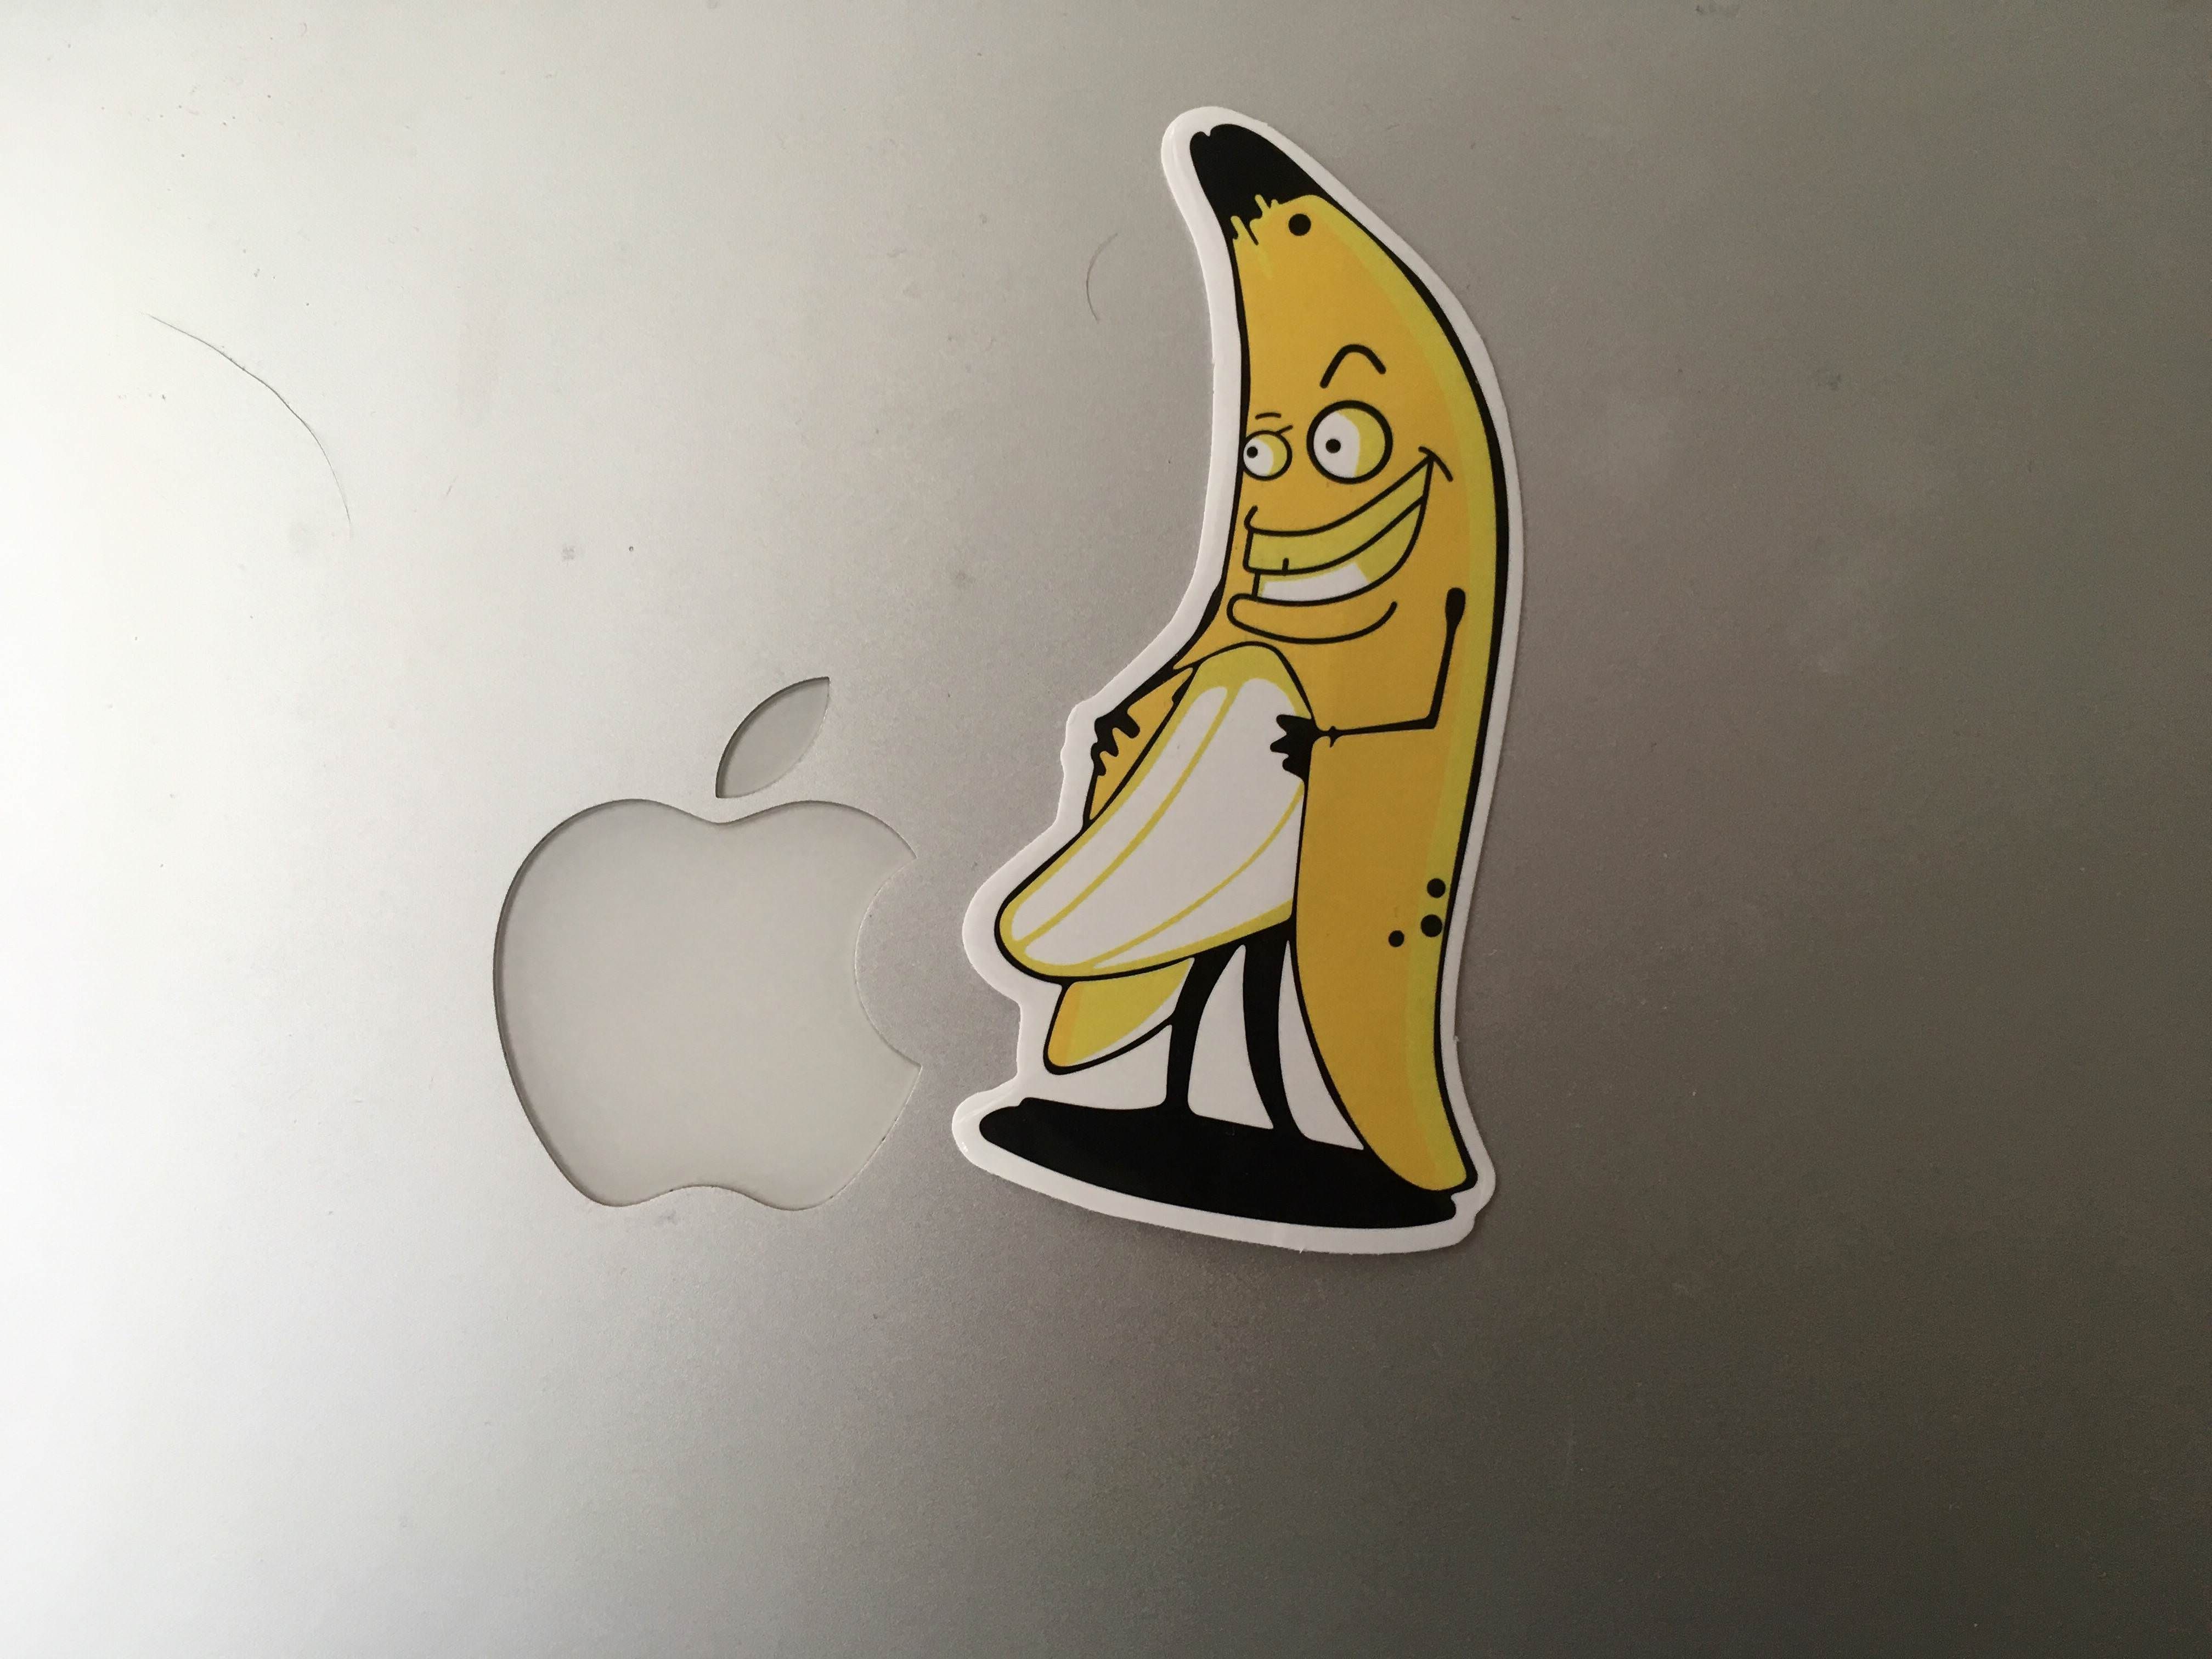 Found a good spot for this sticker at last